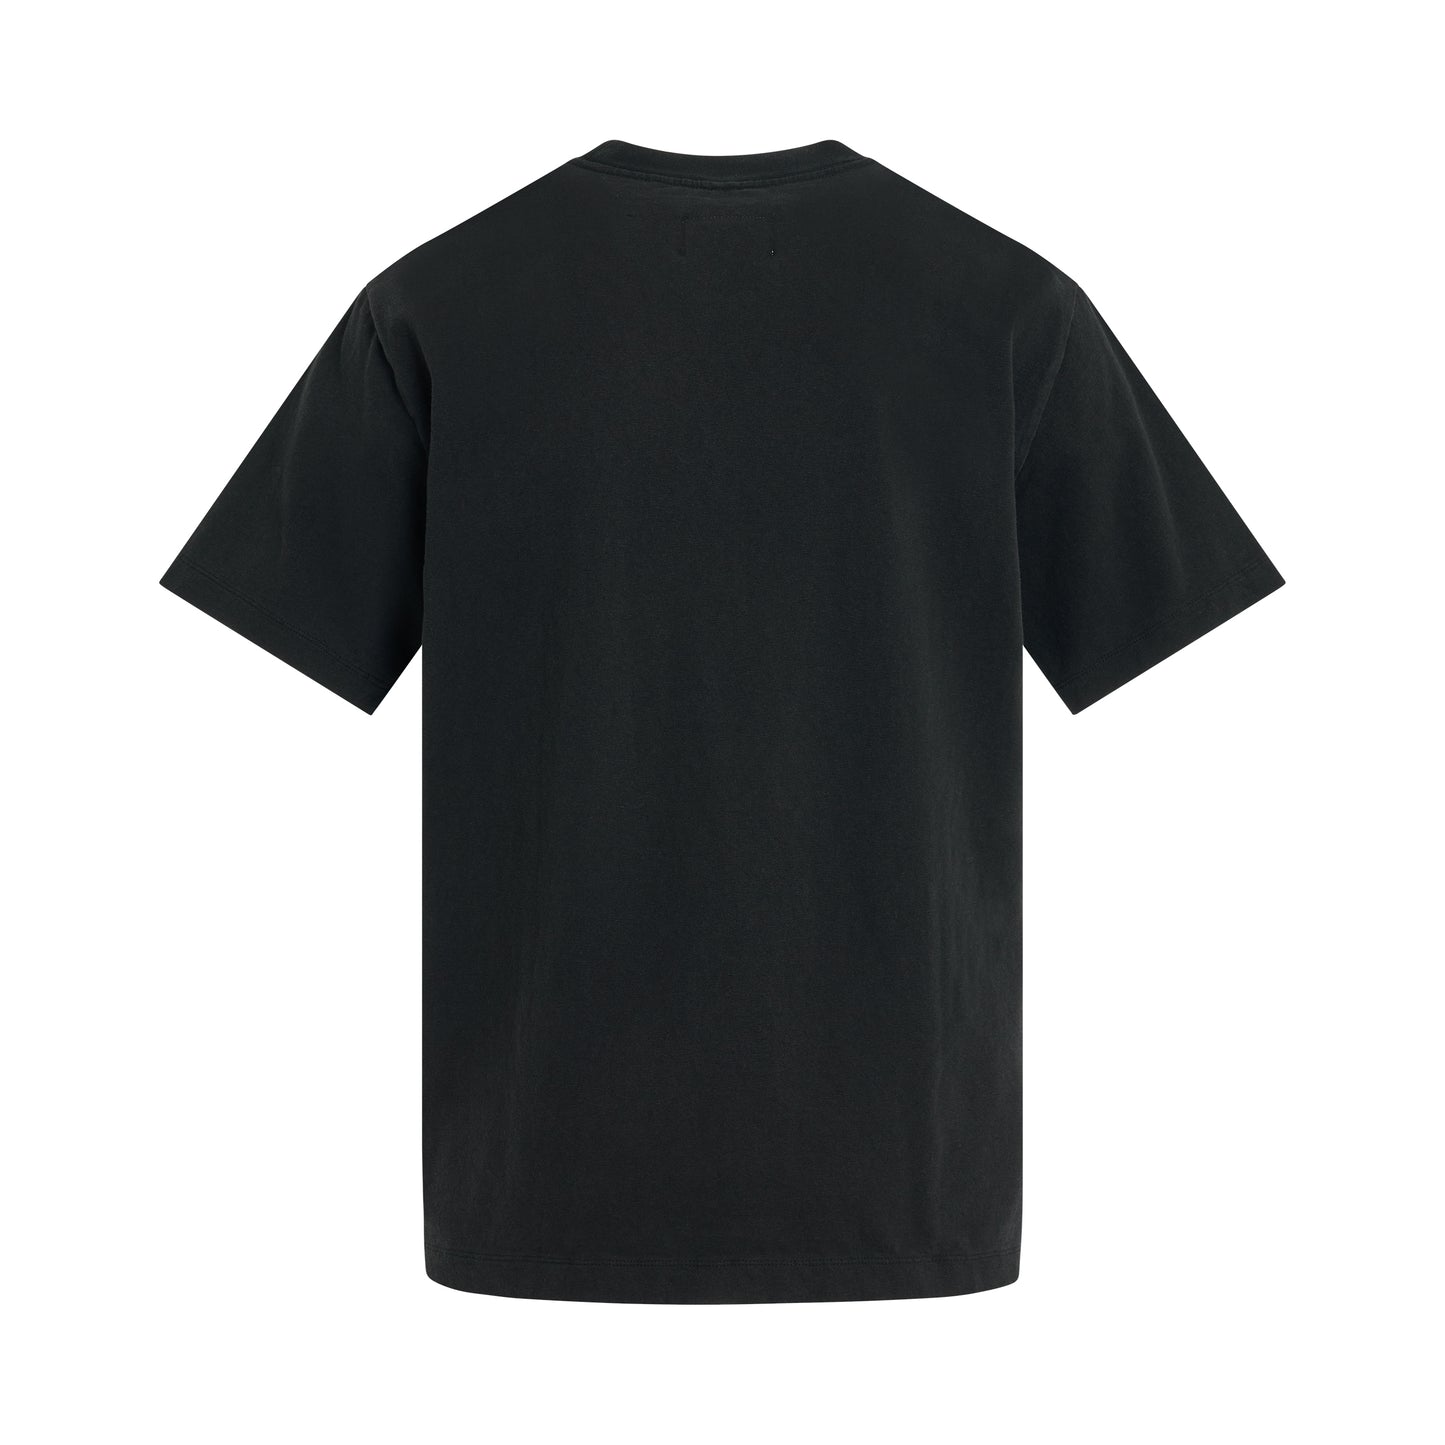 SD Card Embroidery T-Shirt in Black